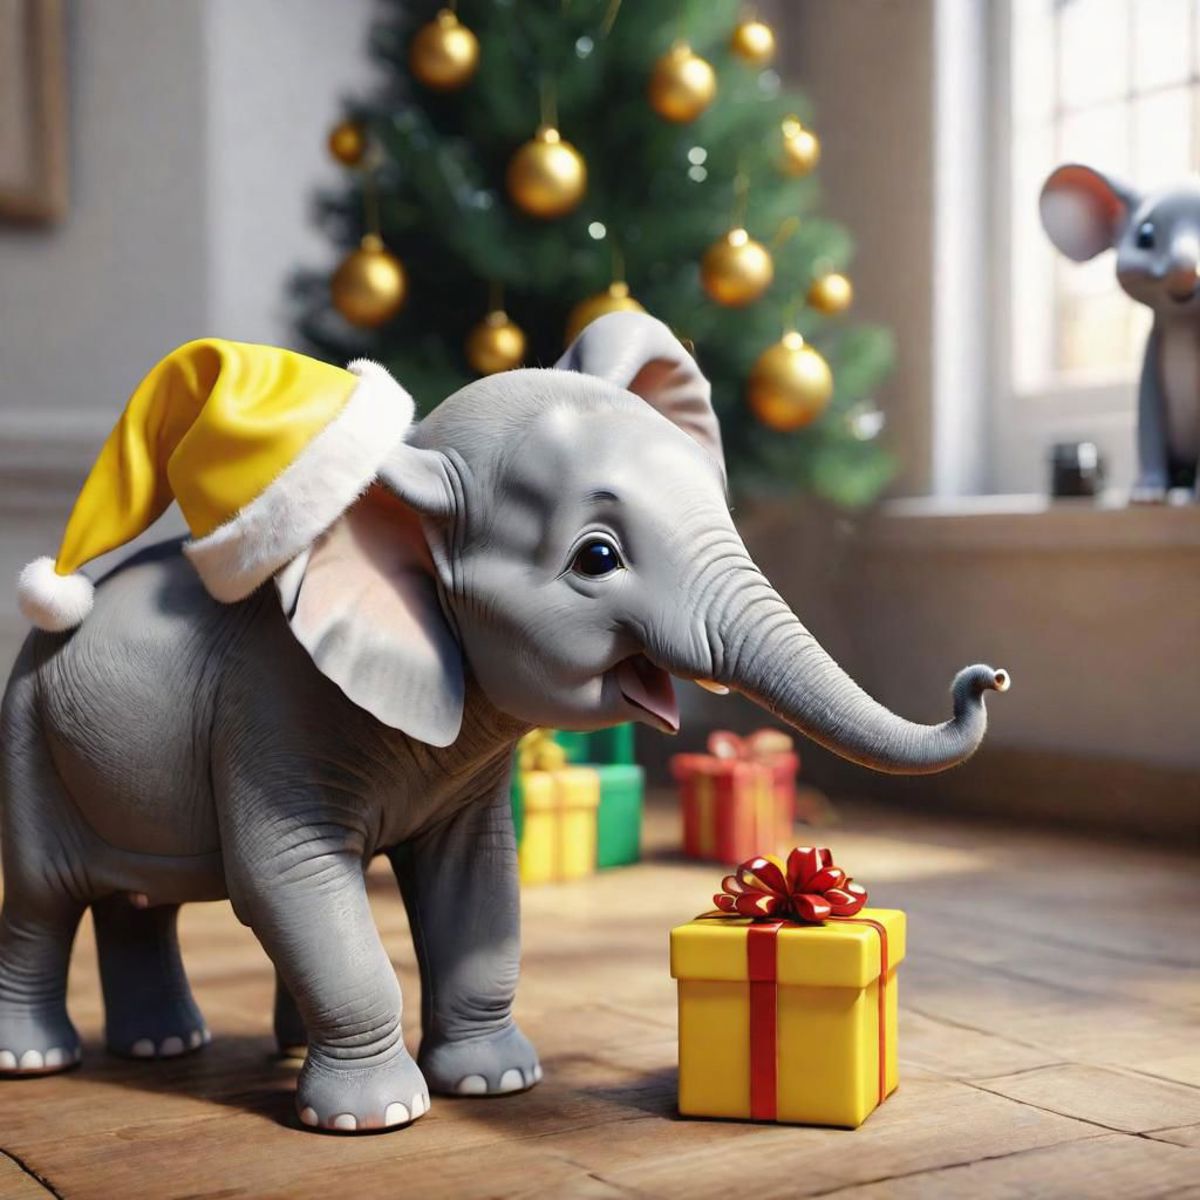 Christmas-themed elephant figurine with a Santa hat and a yellow bowtie.